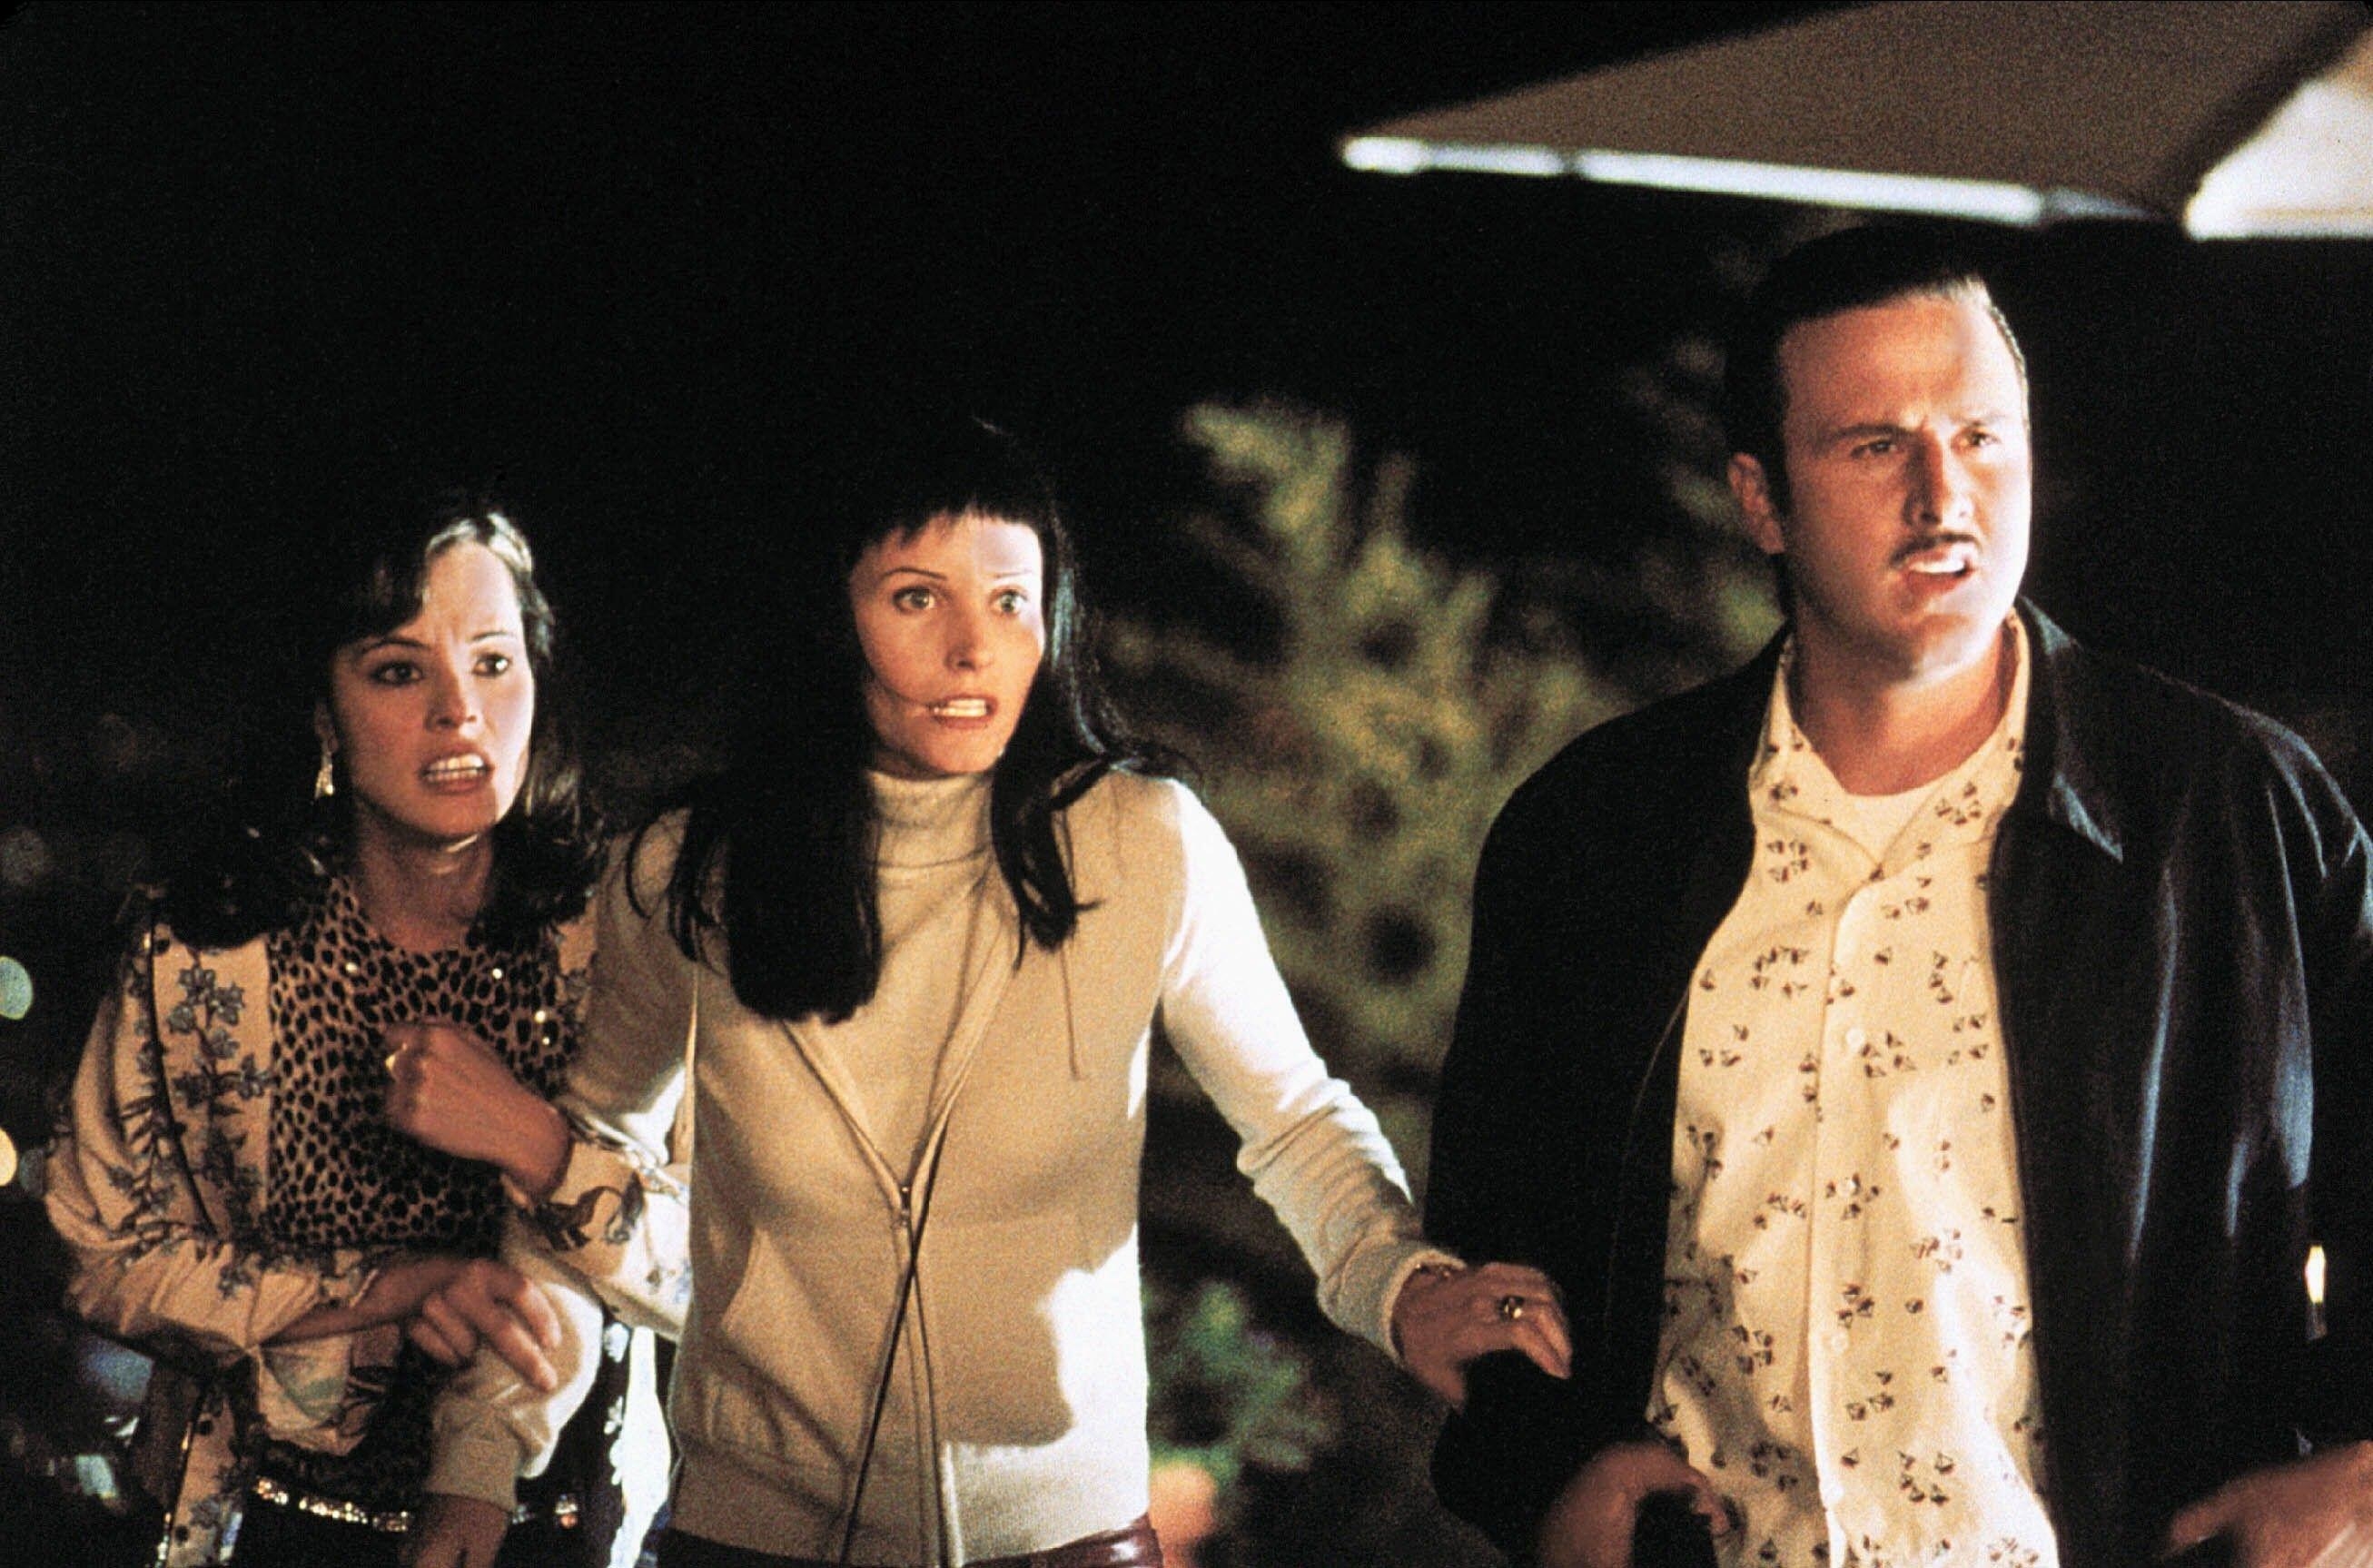 Parker Posey, Courteney Cox and David Arquette are illuminated in the night